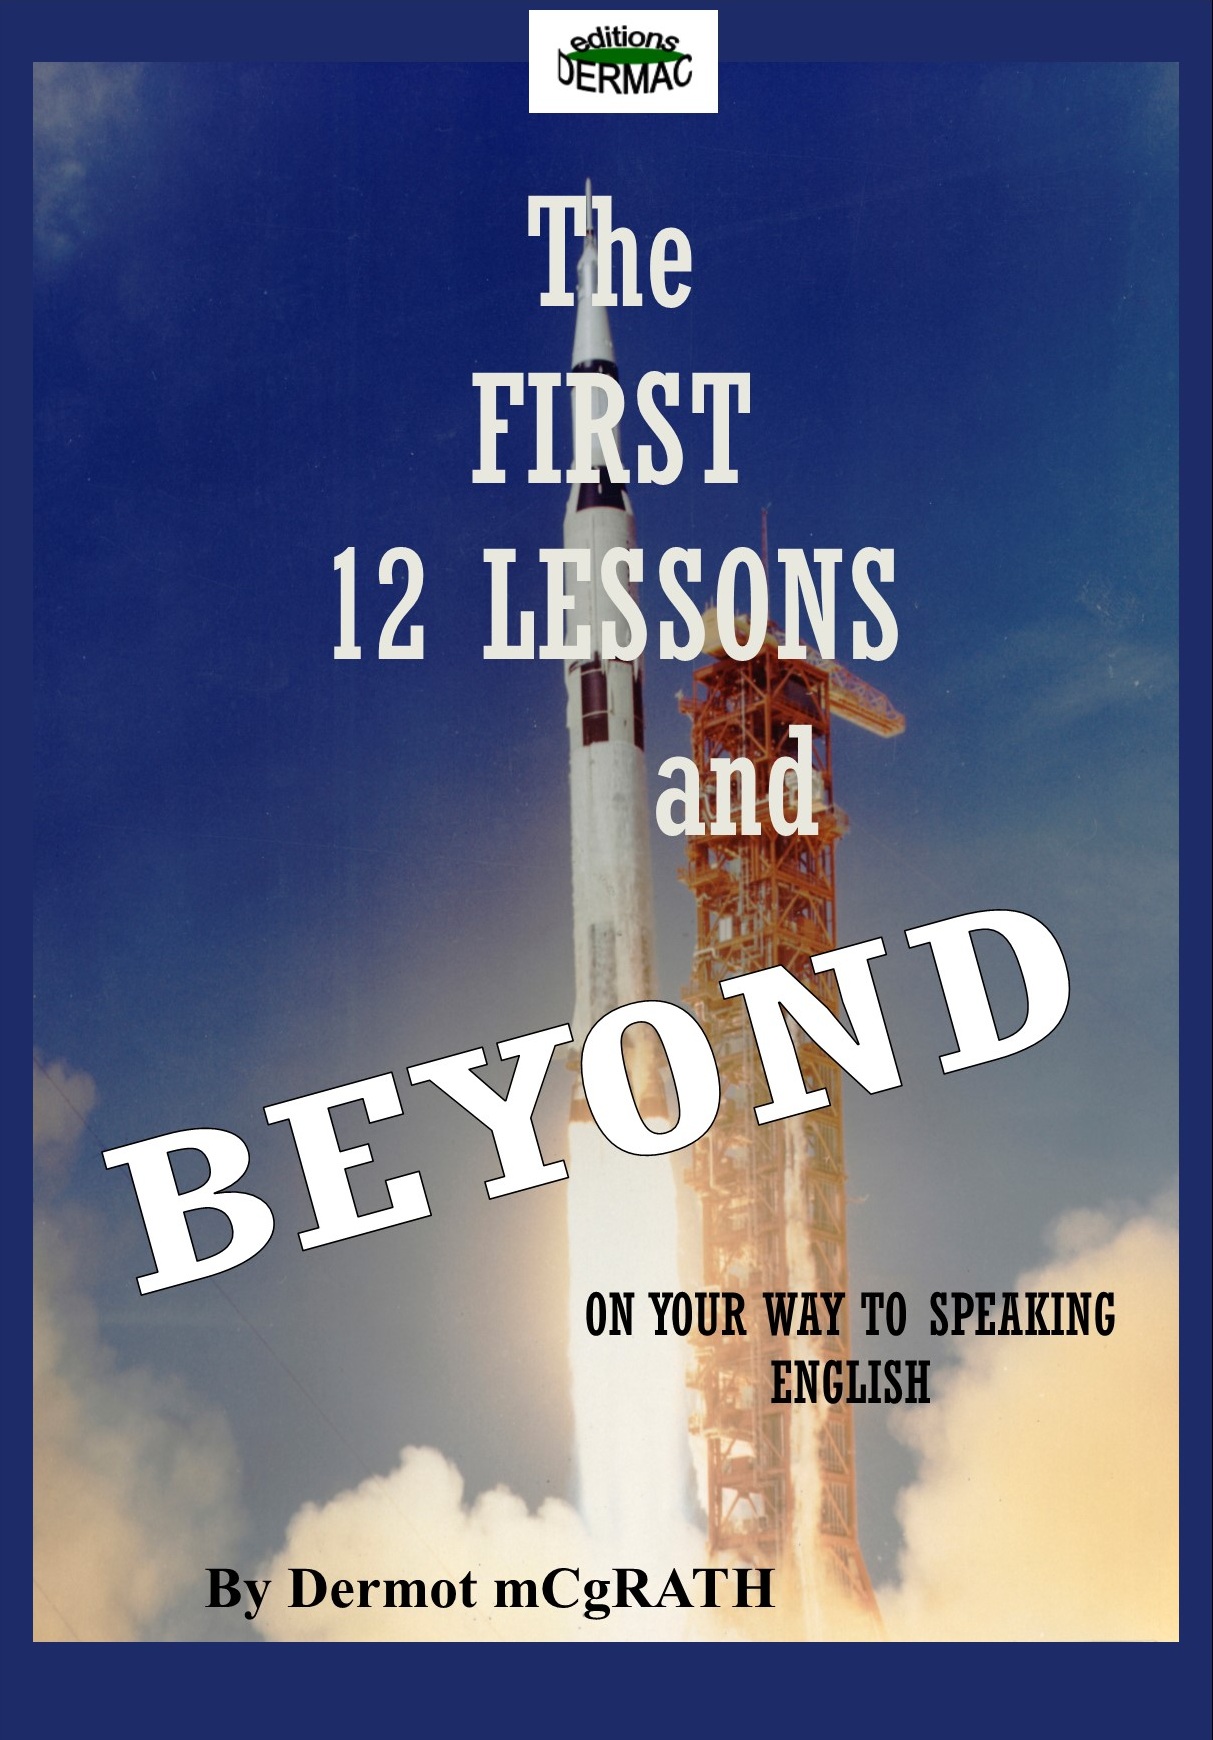 The first 12 lessons and Beyond